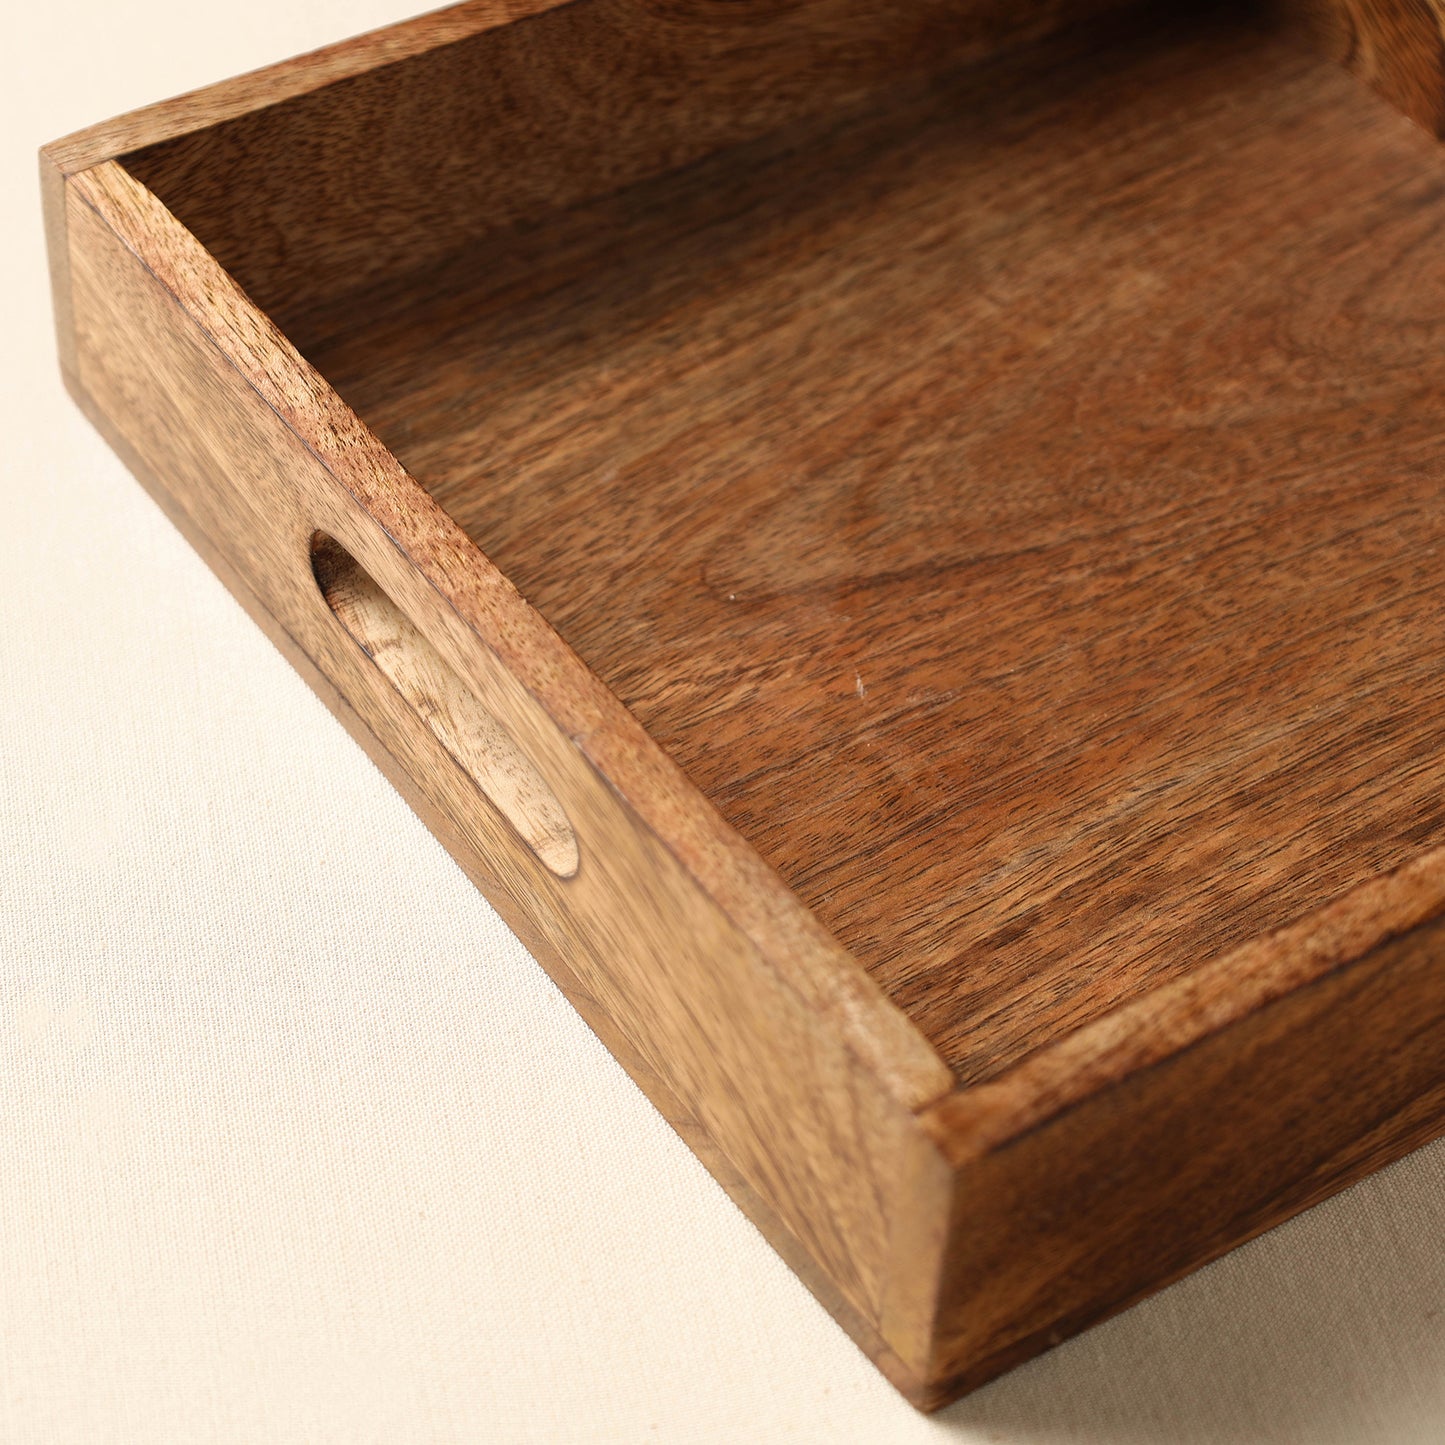 Handcrafted Mango Wooden Serving Tray (10 x 10 in)